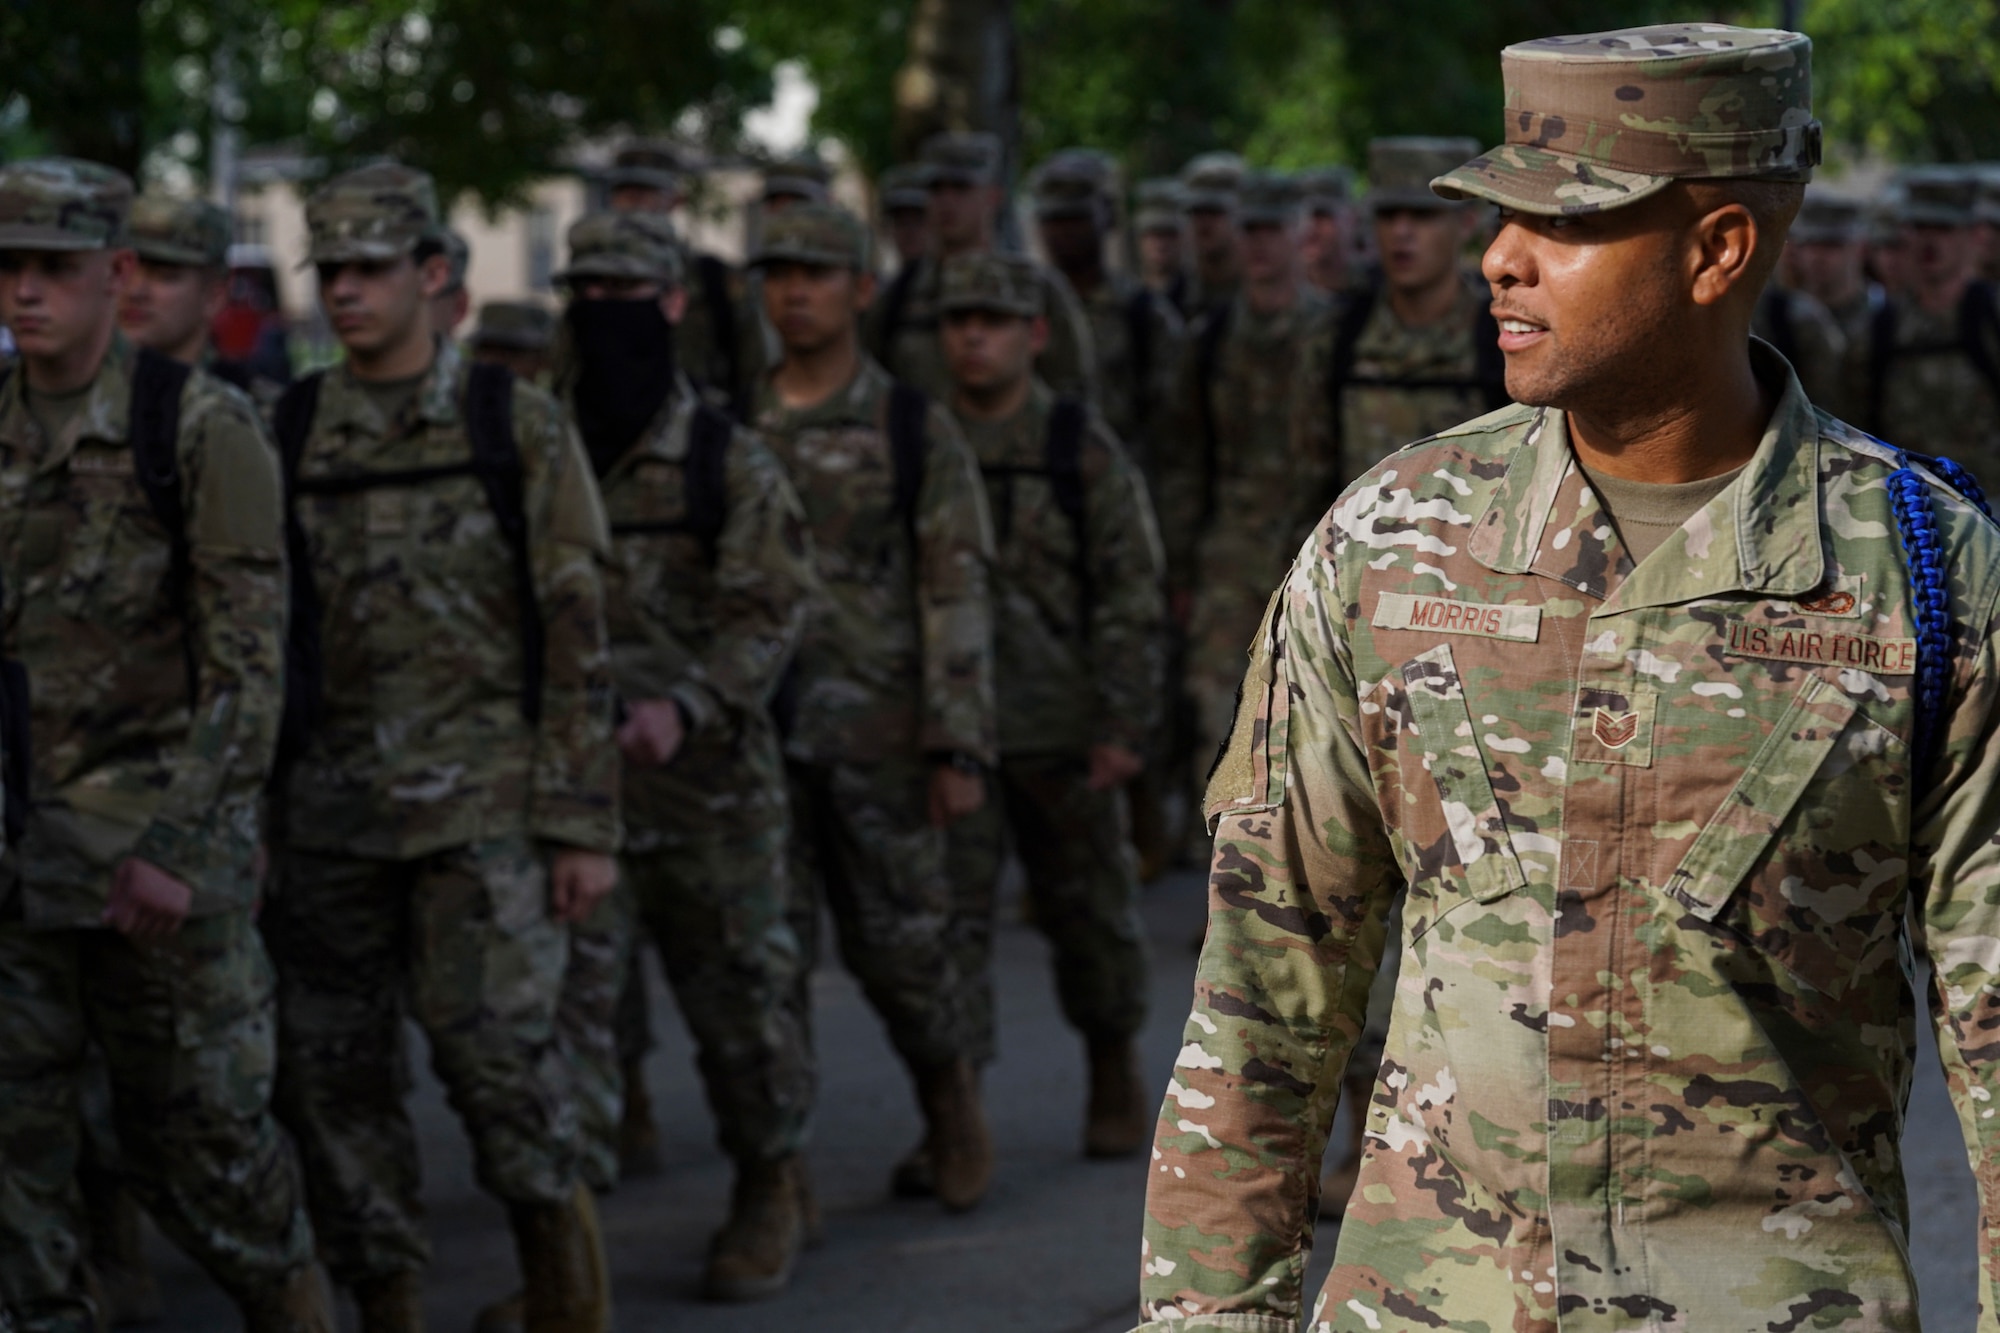 U.S. Air Force Tech. Sgt. Alvin Morris, 336th Training Squadron master military training leader, marches Airmen in training to school on Keesler Air Force Base, Mississippi, June 29, 2021. “I’ve been empowered with the tools to mold Airmen to be successful and to also challenge them to grow,” said Morris. “Understanding this pivotal role and short amount of time that I have to impact each Airman keeps me ready to mentor, train and lead at all times. Developing our Airmen, and watching them grow into leaders is very fulfilling for my position.” (U.S. Air Force photo by Senior Airman Spencer Tobler)